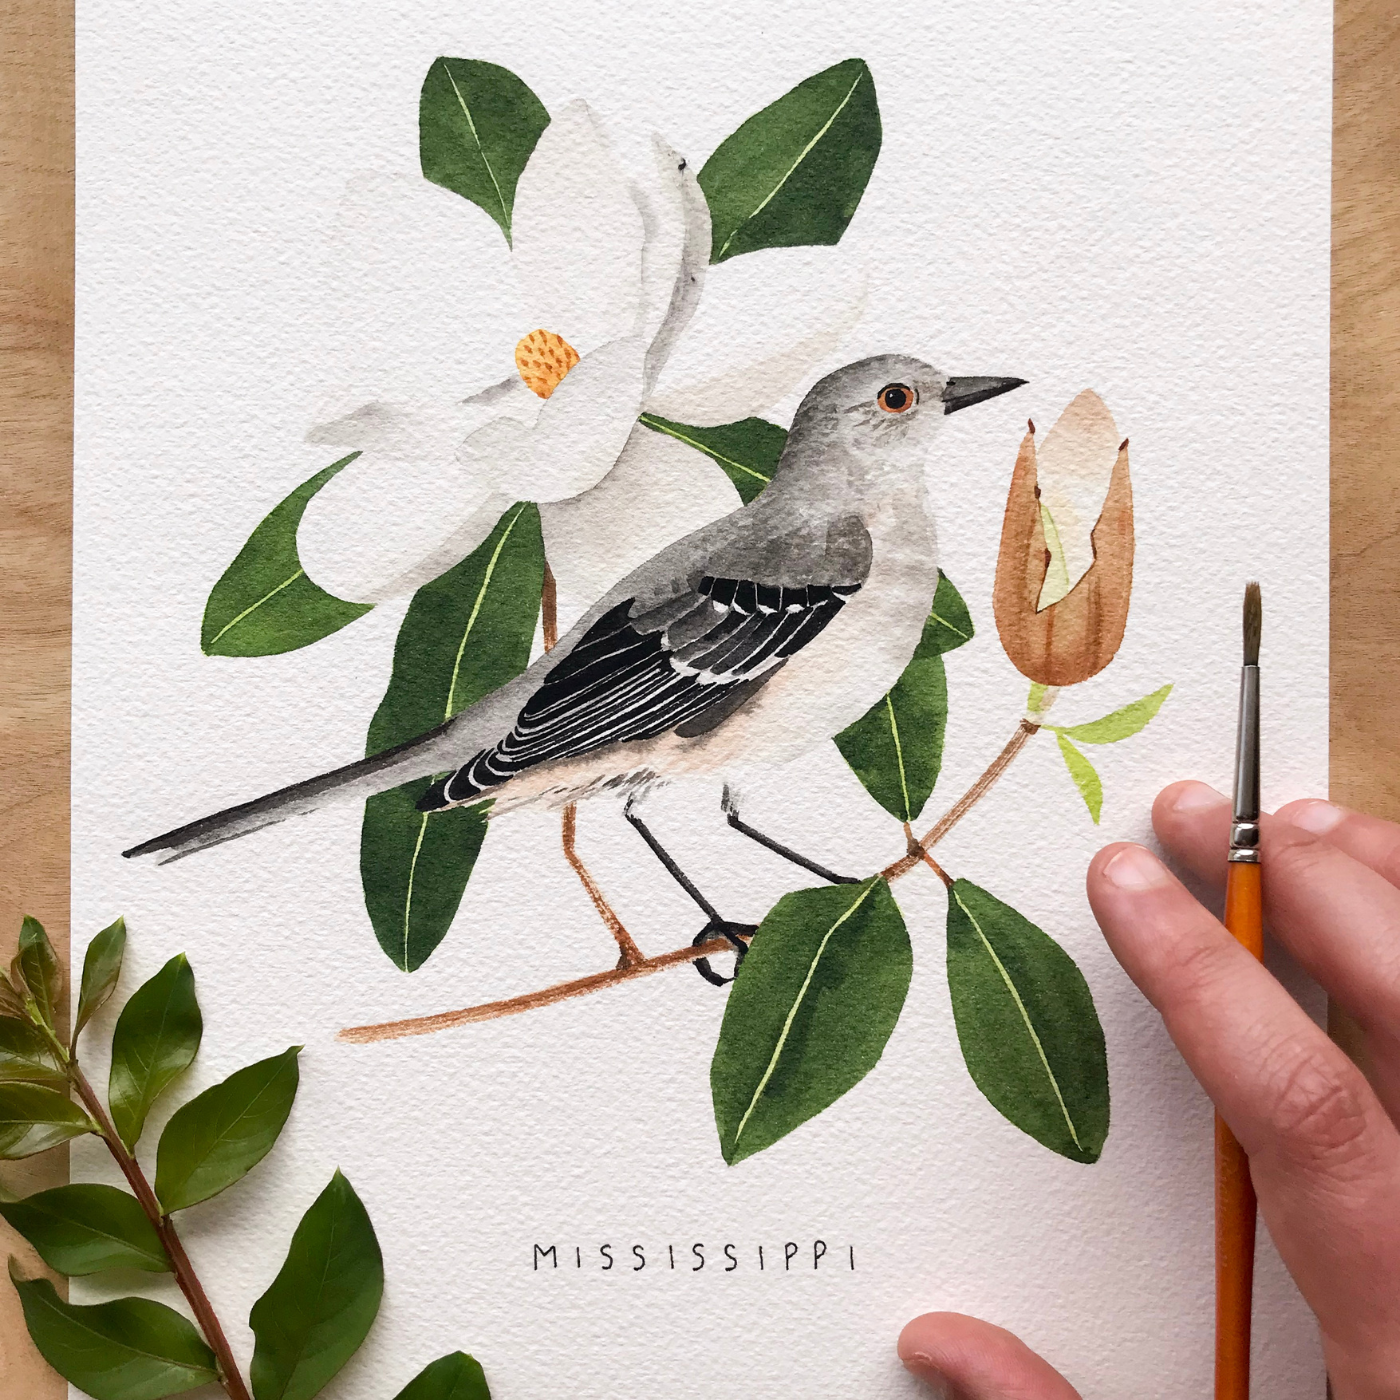 An in-progress painting of Mississippi’s state bird, a northern mockingbird, sitting on a magnolia branch with a white magnolia bloom behind it and a partially open bloom to its left. The painting is on a white piece of paper with the word “Mississippi” written underneath the bird in small black capital letters. A hand holding a small orange paintbrush is at the painting’s bottom right.